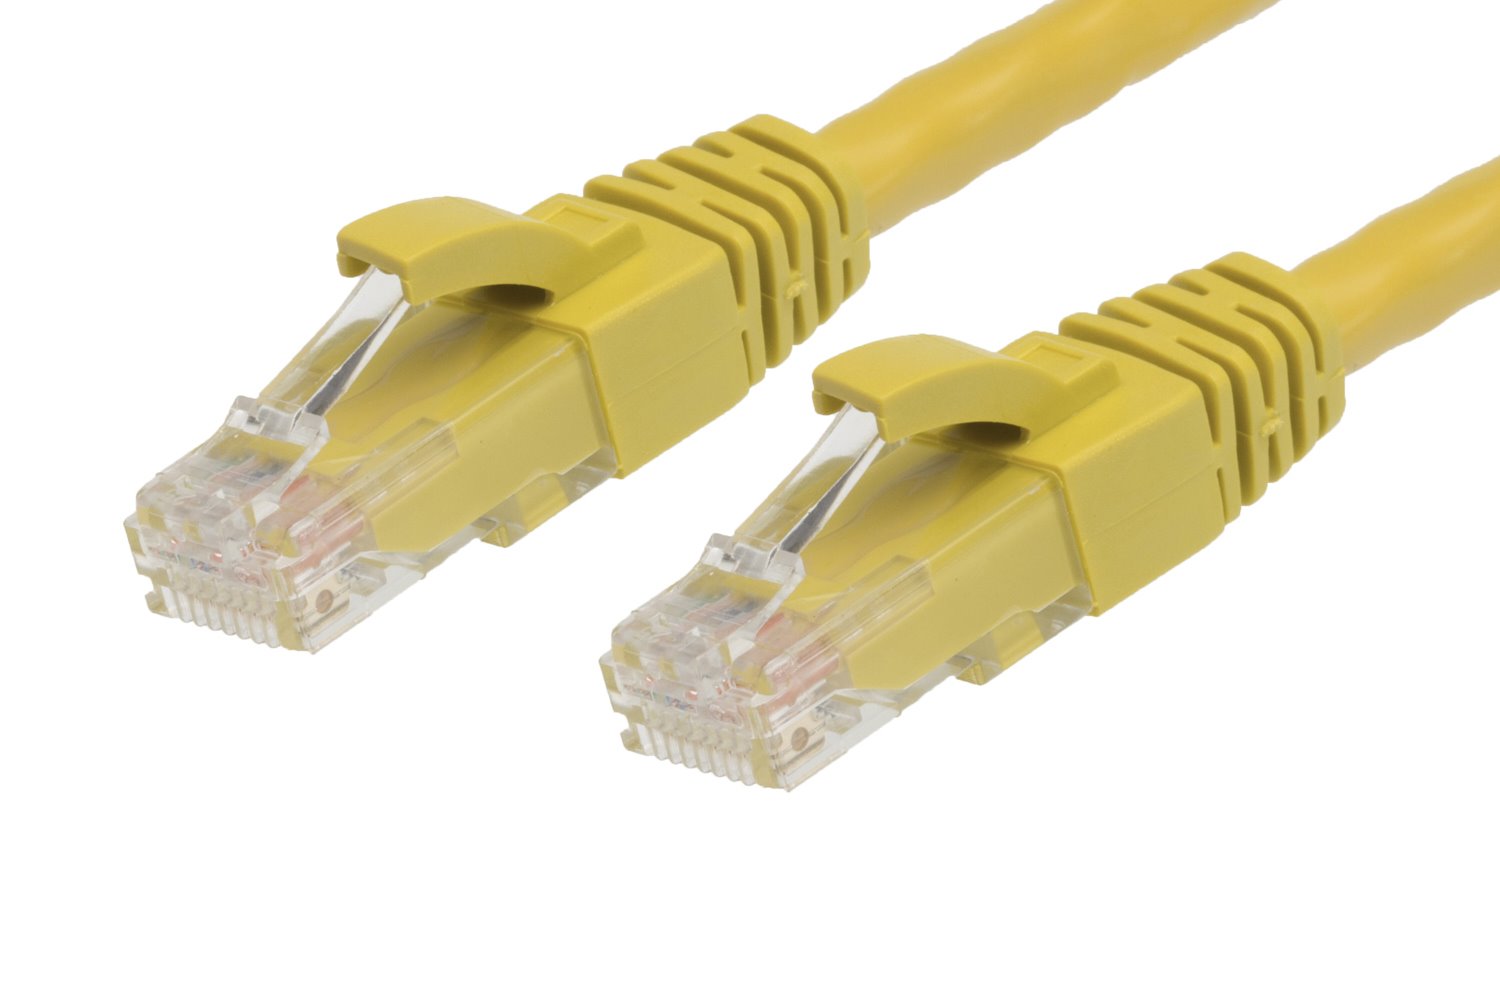 4Cabling 2M Cat 5E Ethernet Network Cable. Yellow